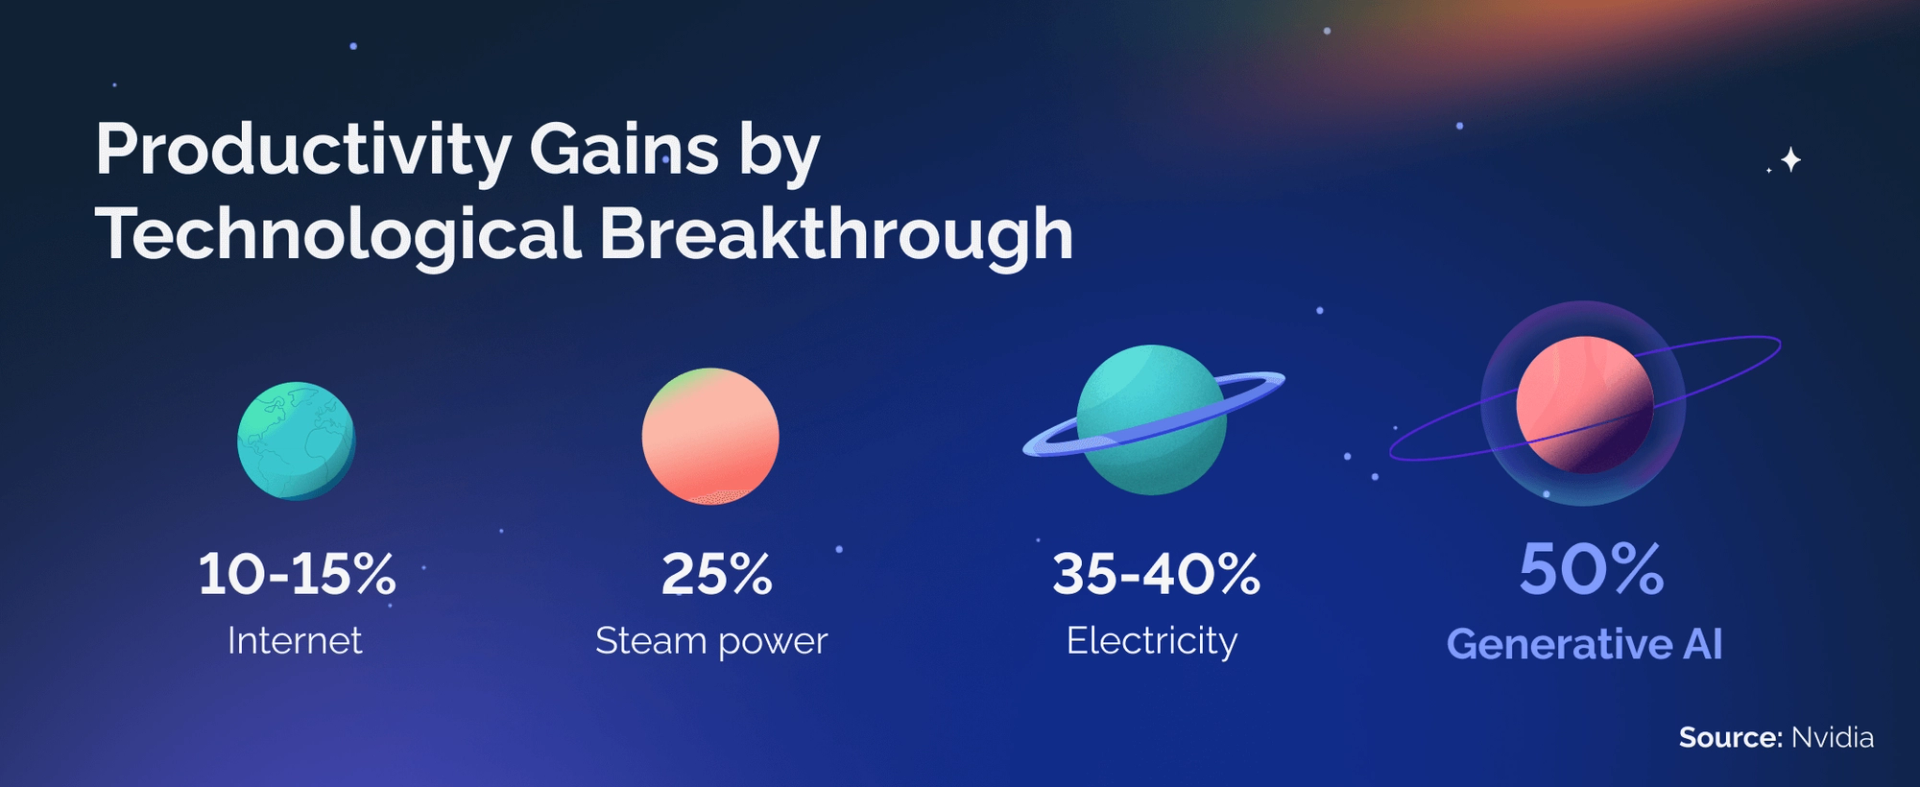 An infographic that shows and compares productivity gains by technological breakthroughs.The internet: 10-15%. Steam power: 25%. Electricity: 35-40%.  Generative AI: 50%. 